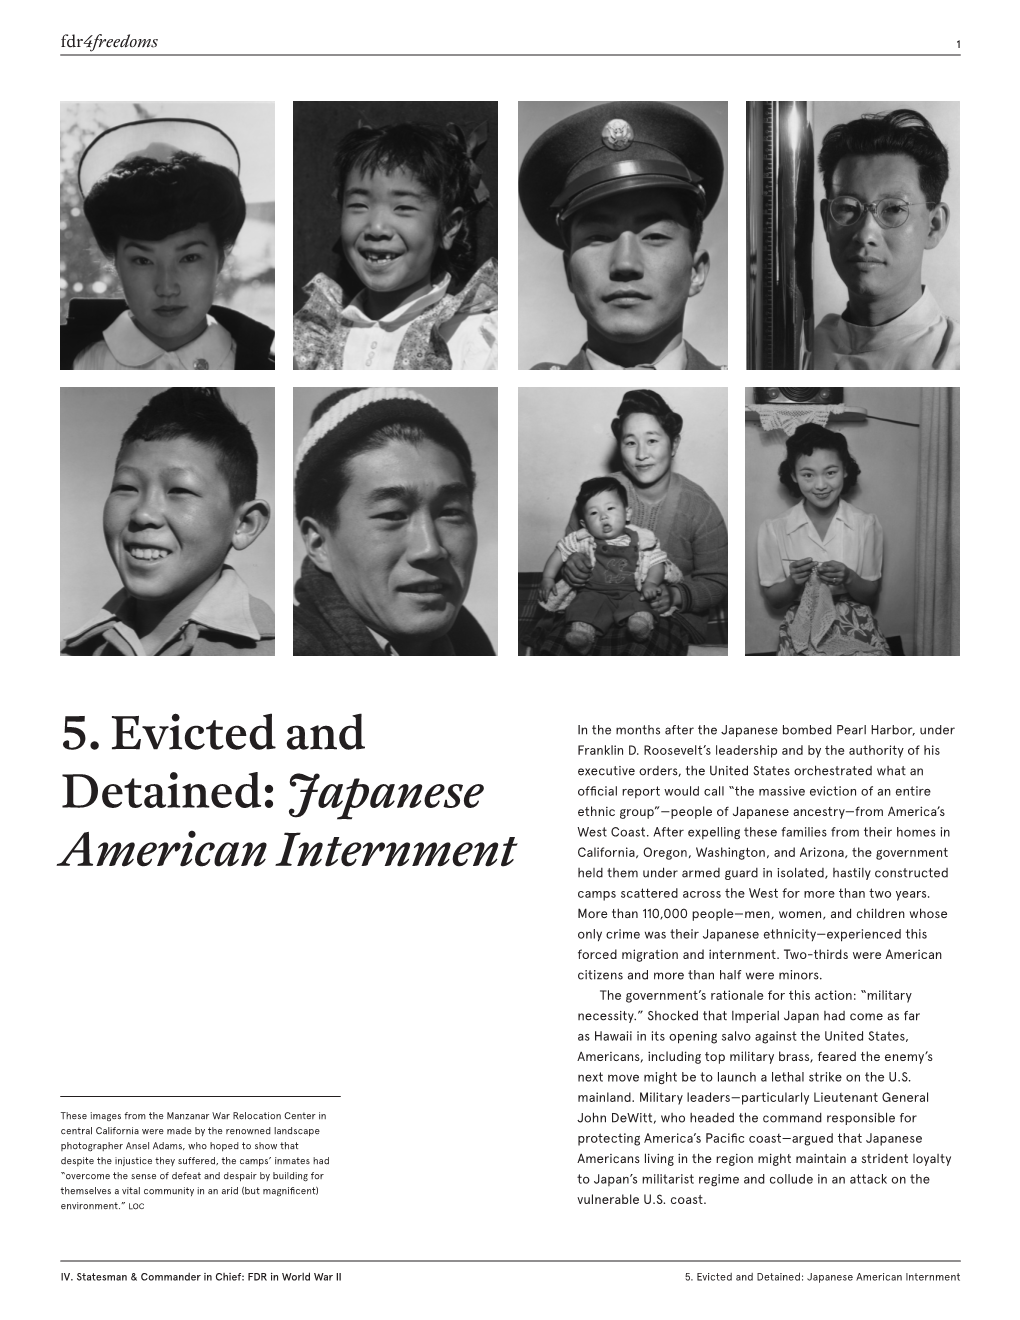 5. Evicted and Detained: Japanese American Internment Fdr4freedoms 2